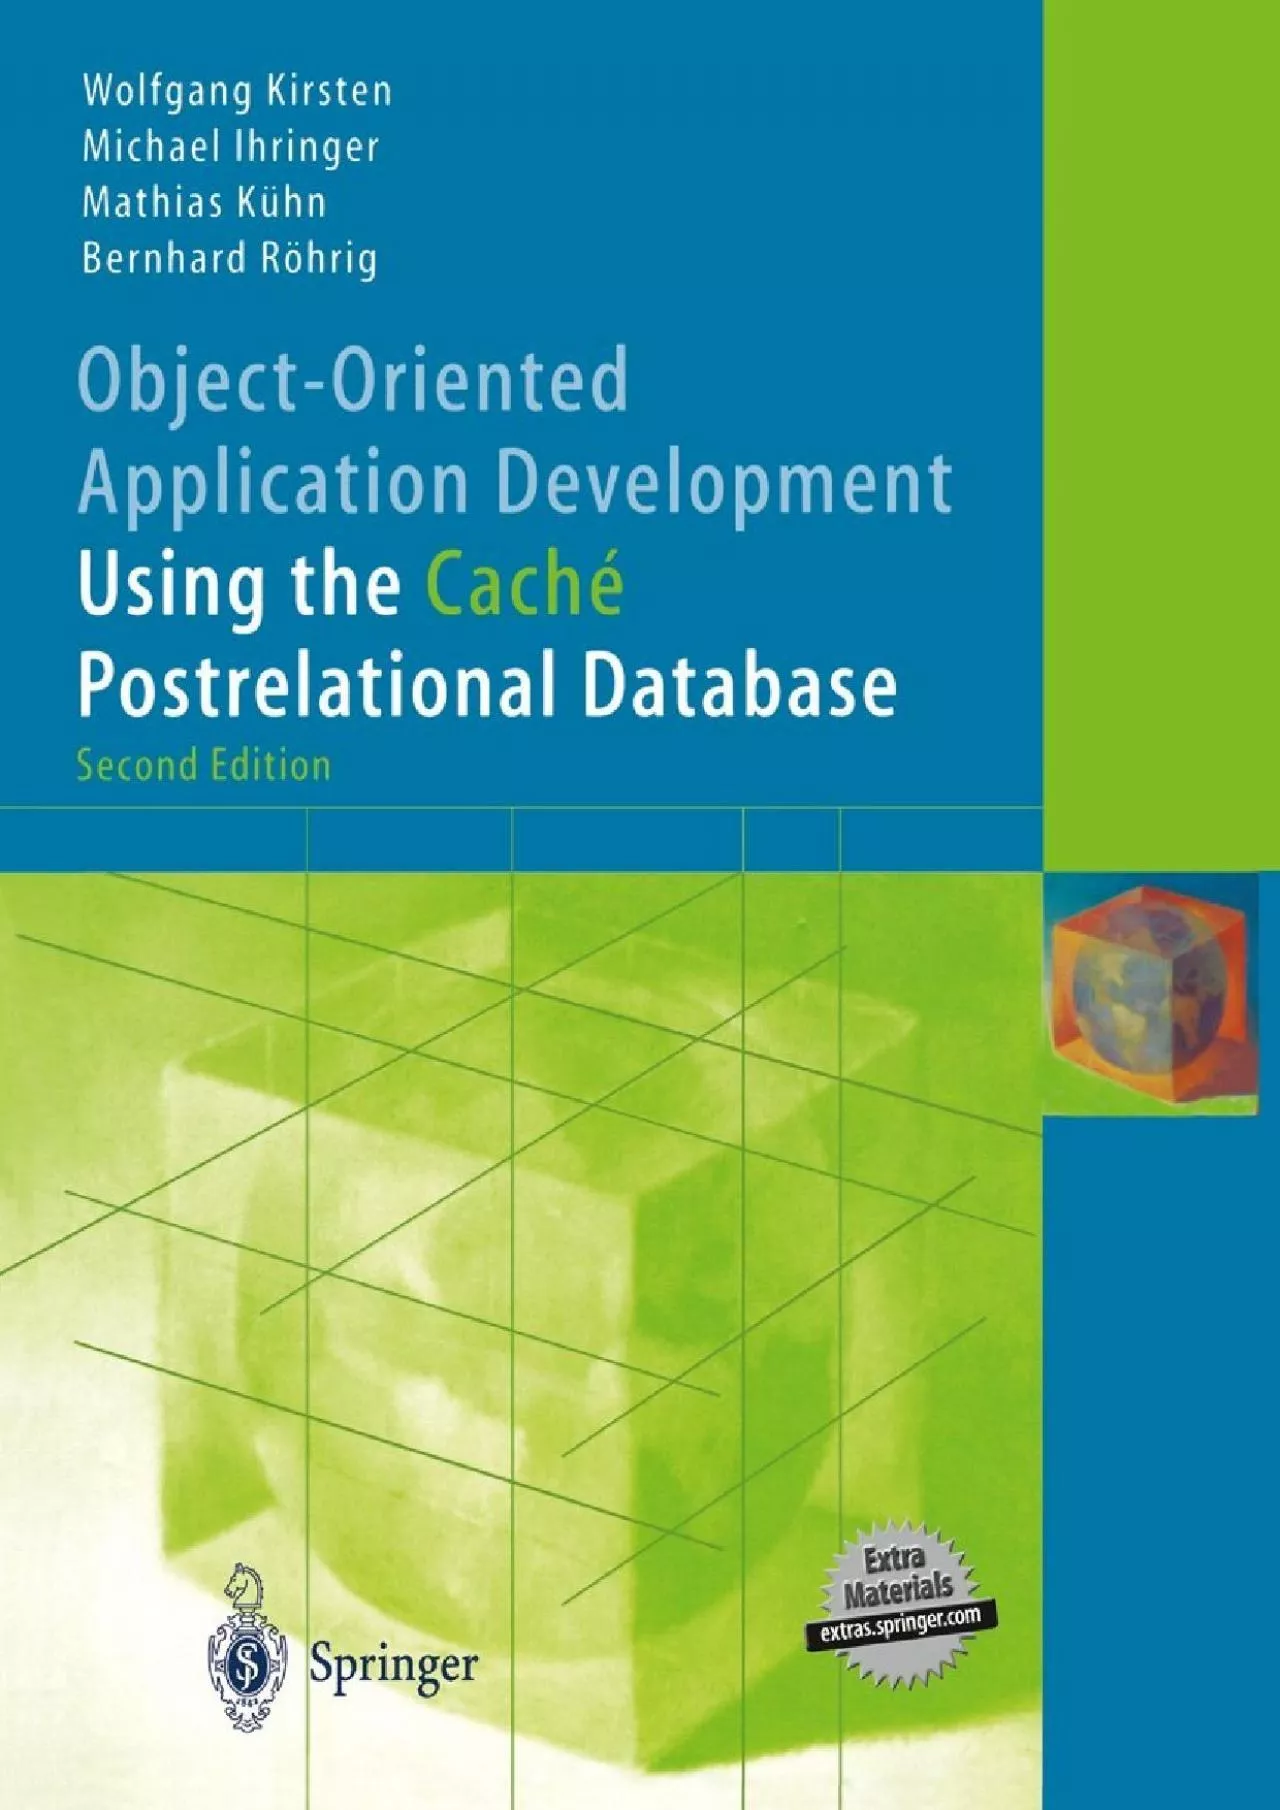 [FREE]-Object-Oriented Application Development Using the Caché Postrelational Database